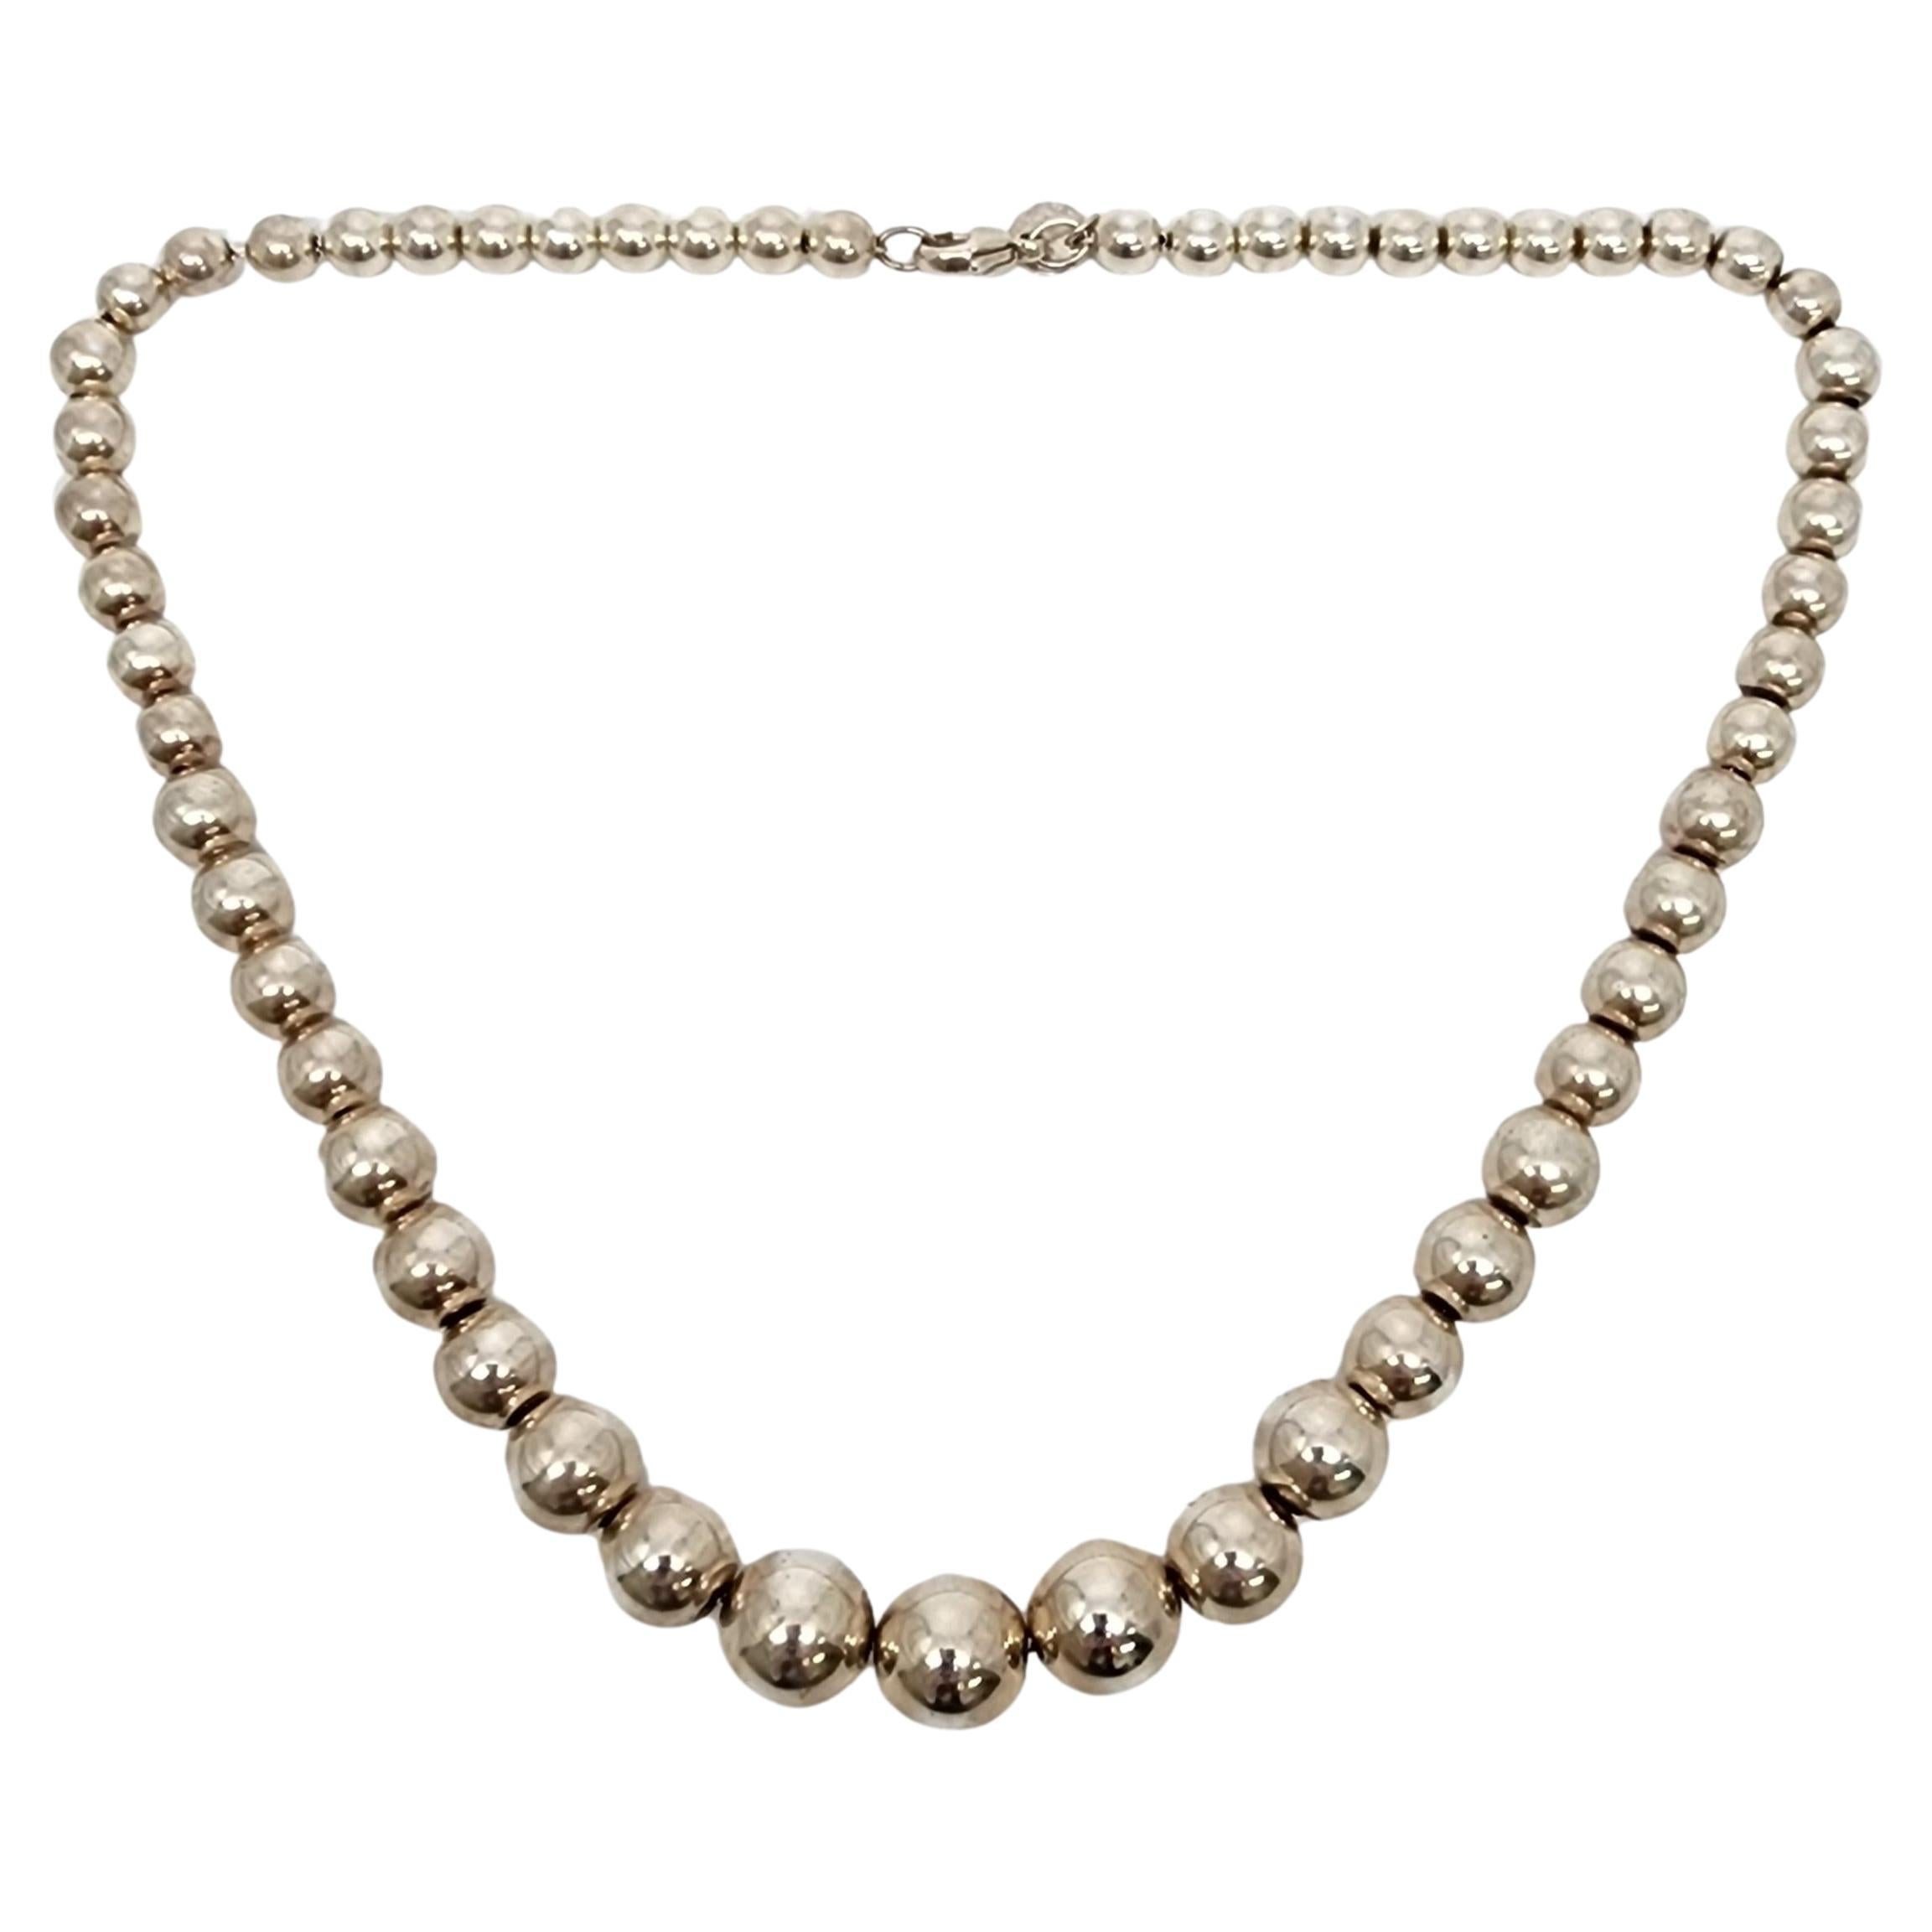 Tiffany & Co Sterling Silver Graduated Ball Bead Necklace 16" #17253 For Sale